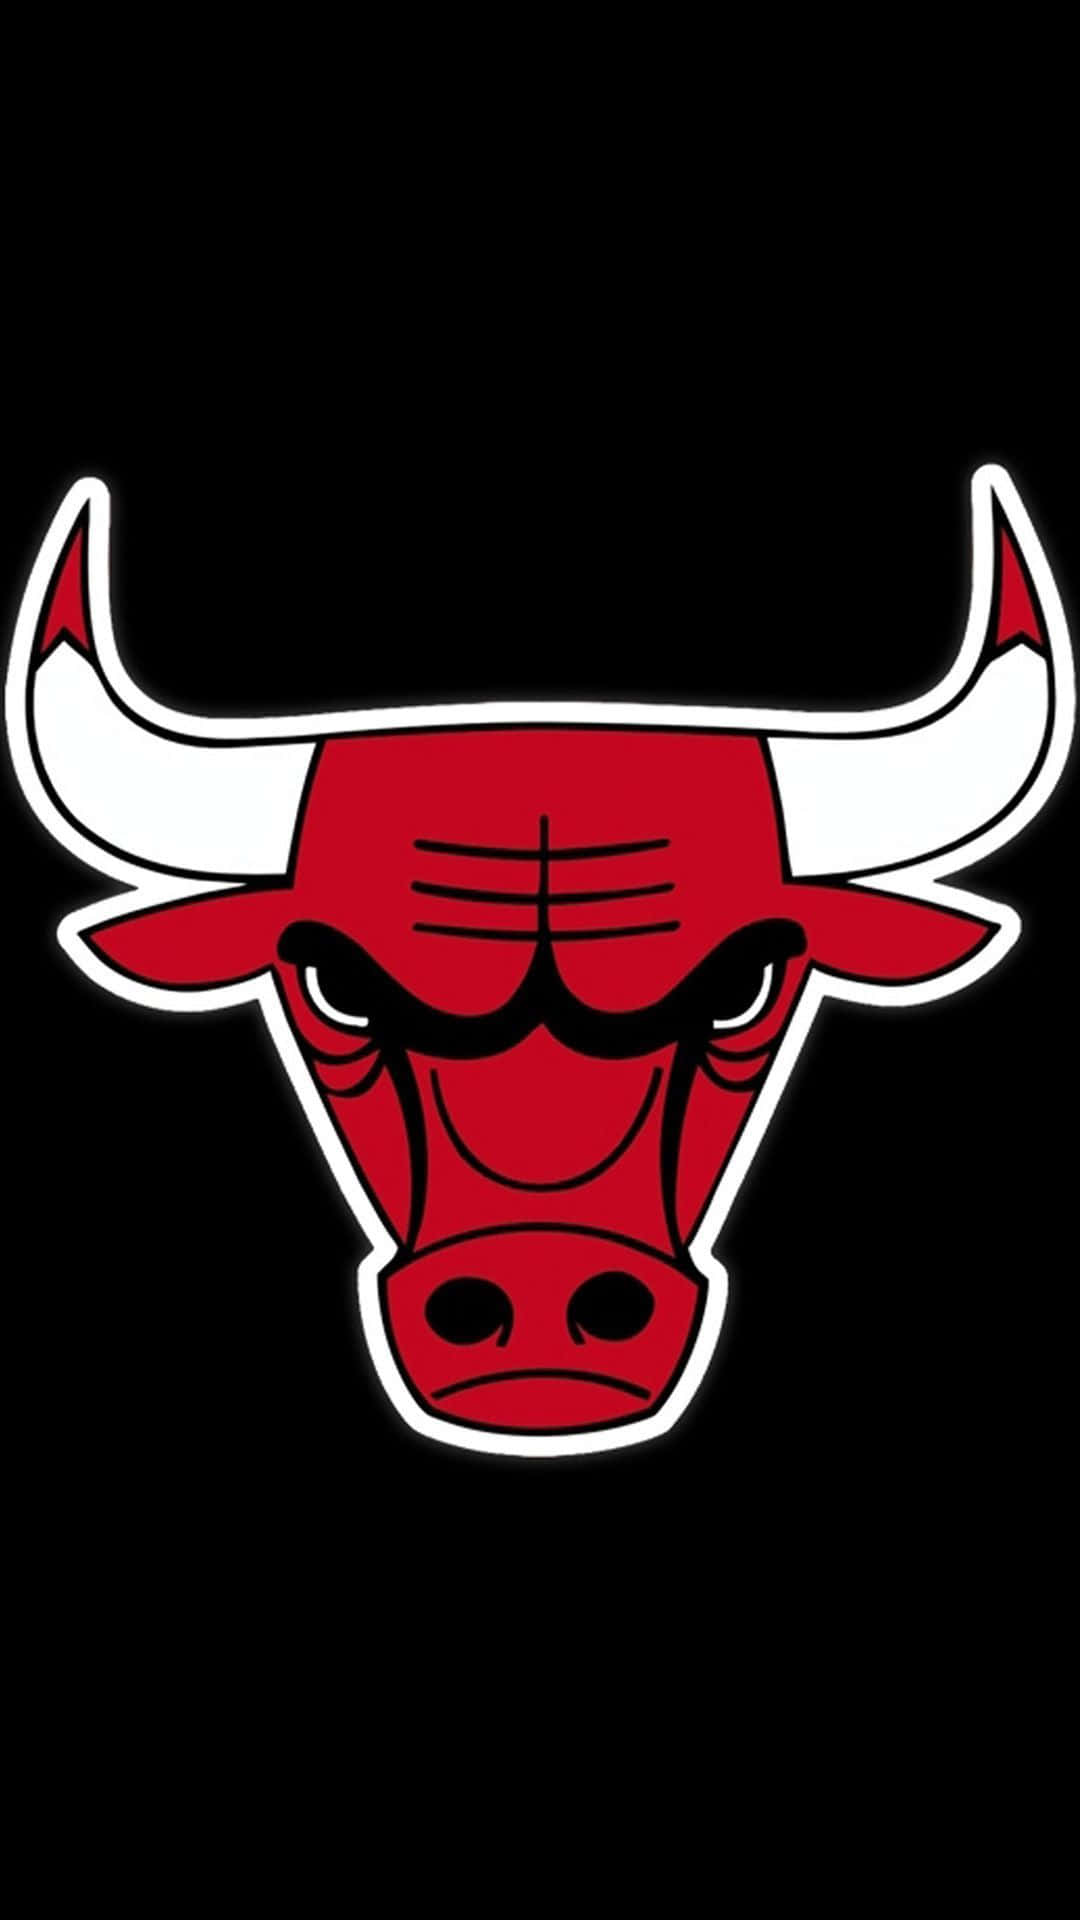 Show your Chicago Bulls pride with this exclusive iPhone design! Wallpaper